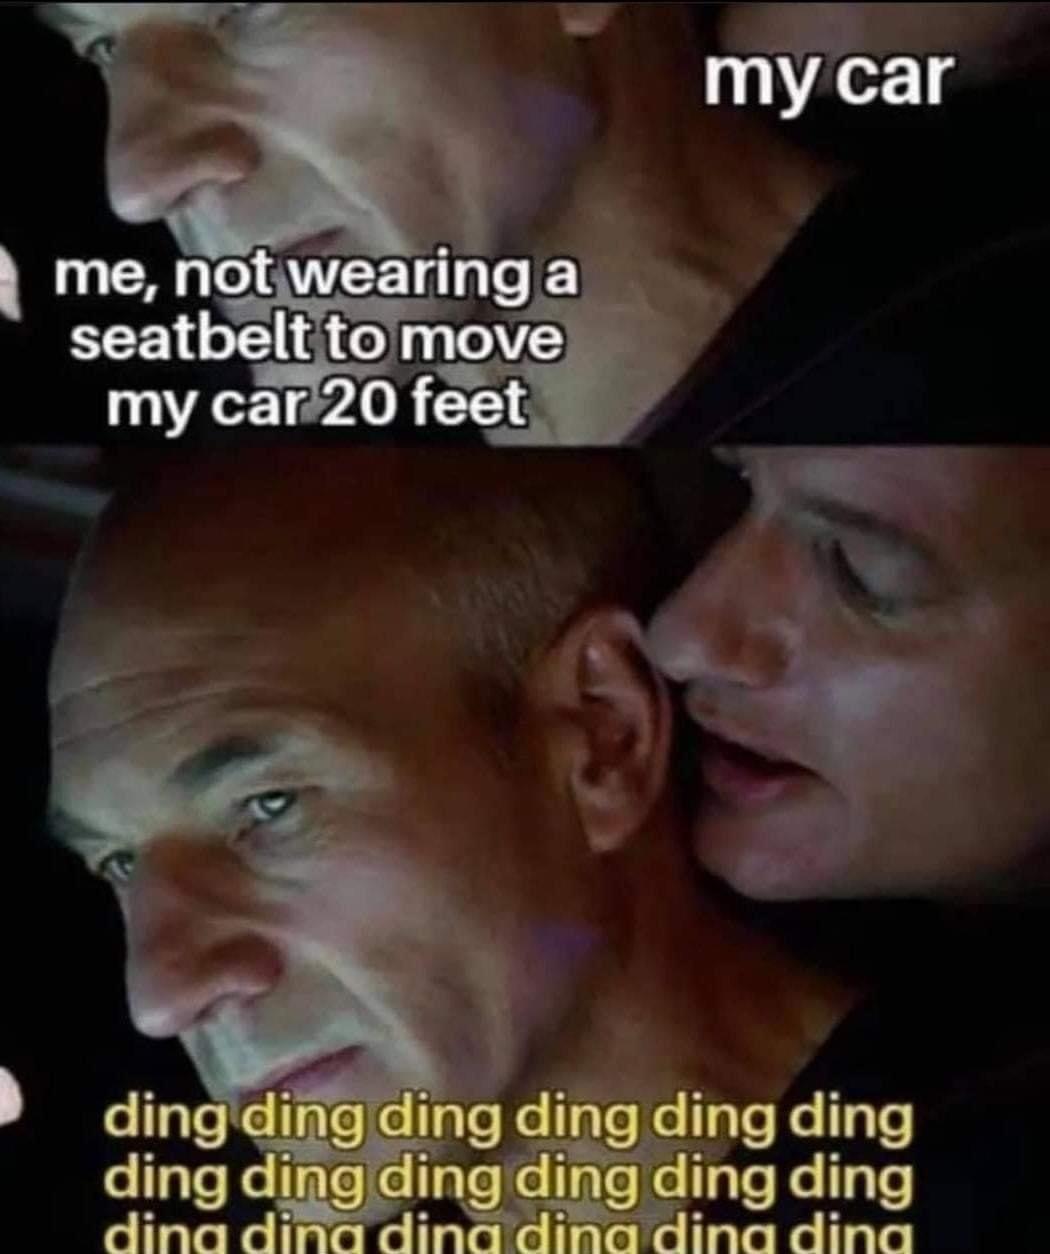 Car memes - my car me, not wearing a seatbelt to move my car 20 feet ding